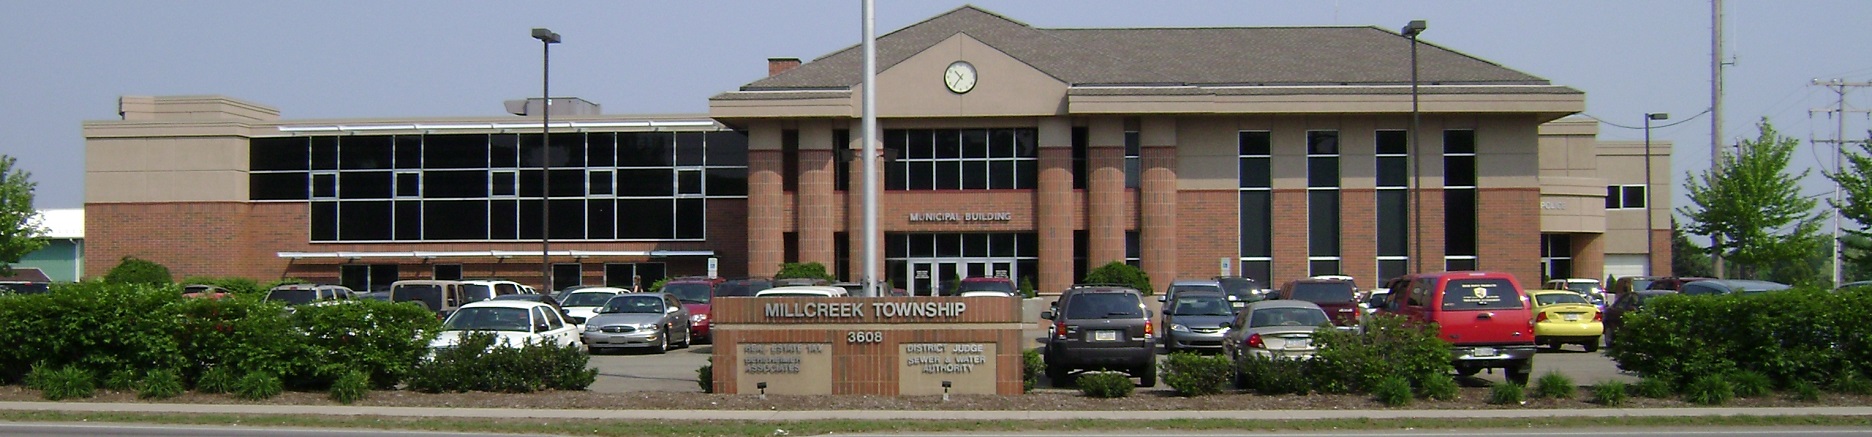 photo of the Millcreek township building